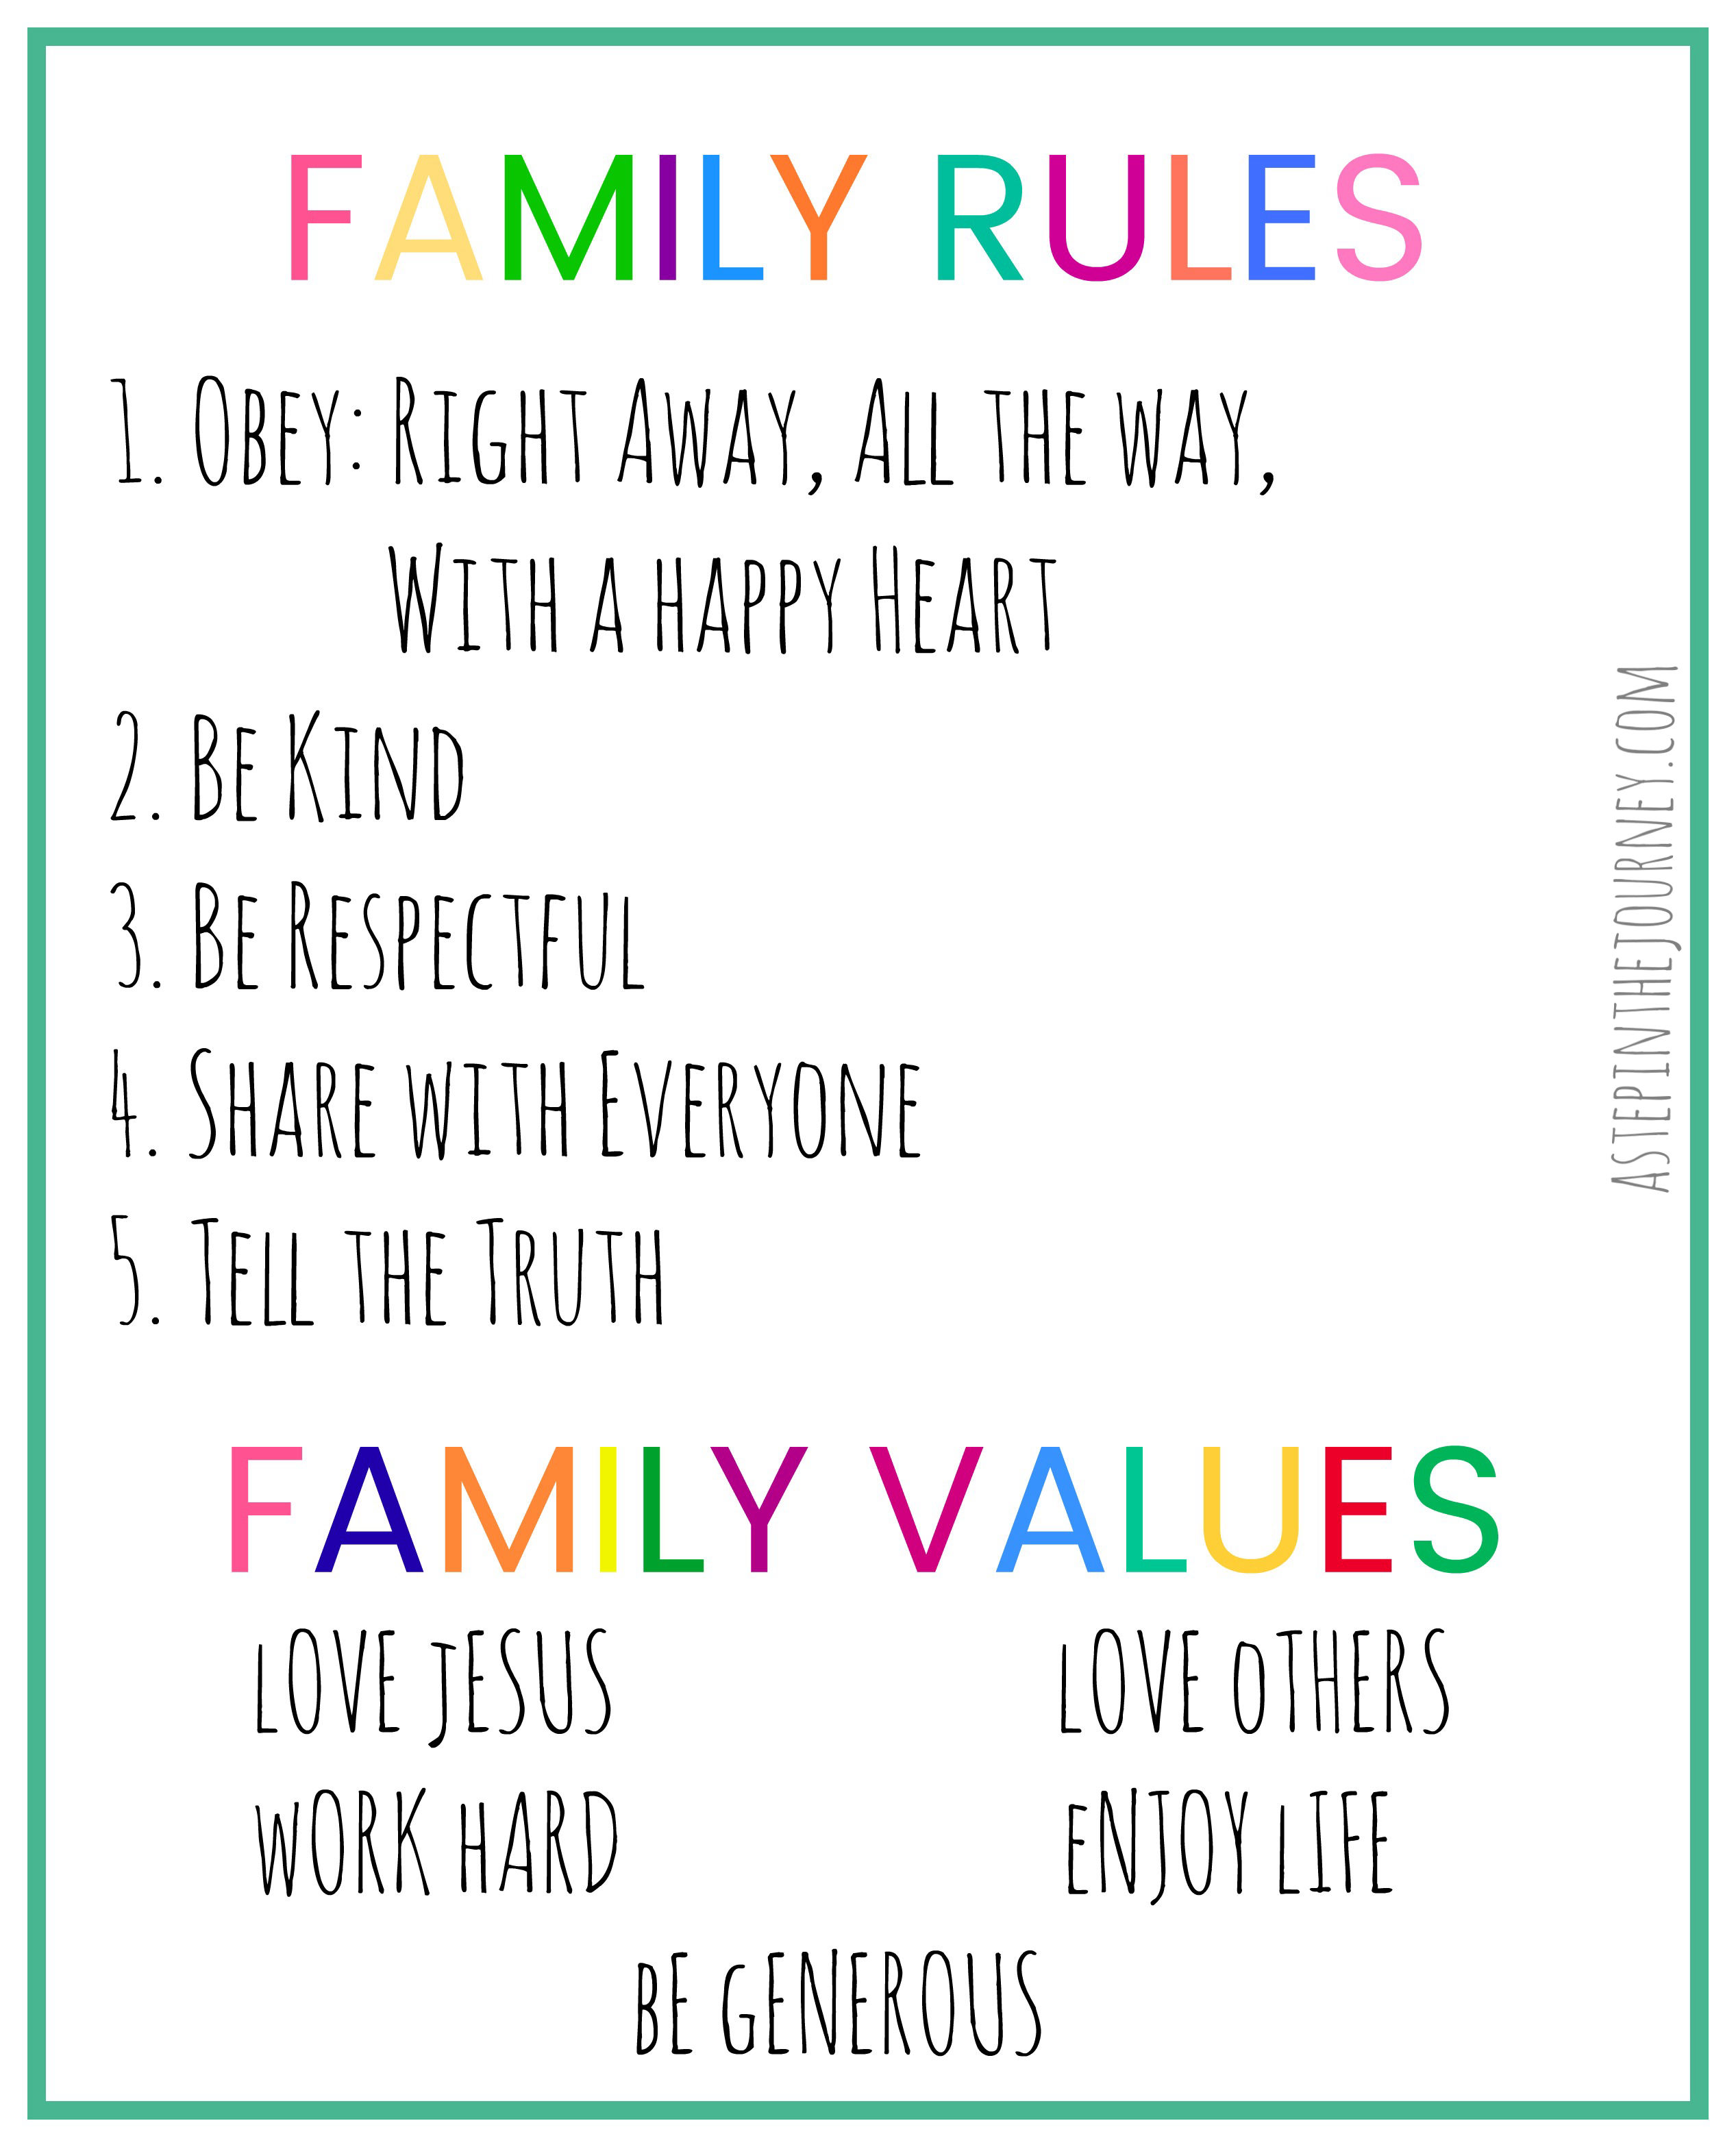 family values - Liberal Dictionary